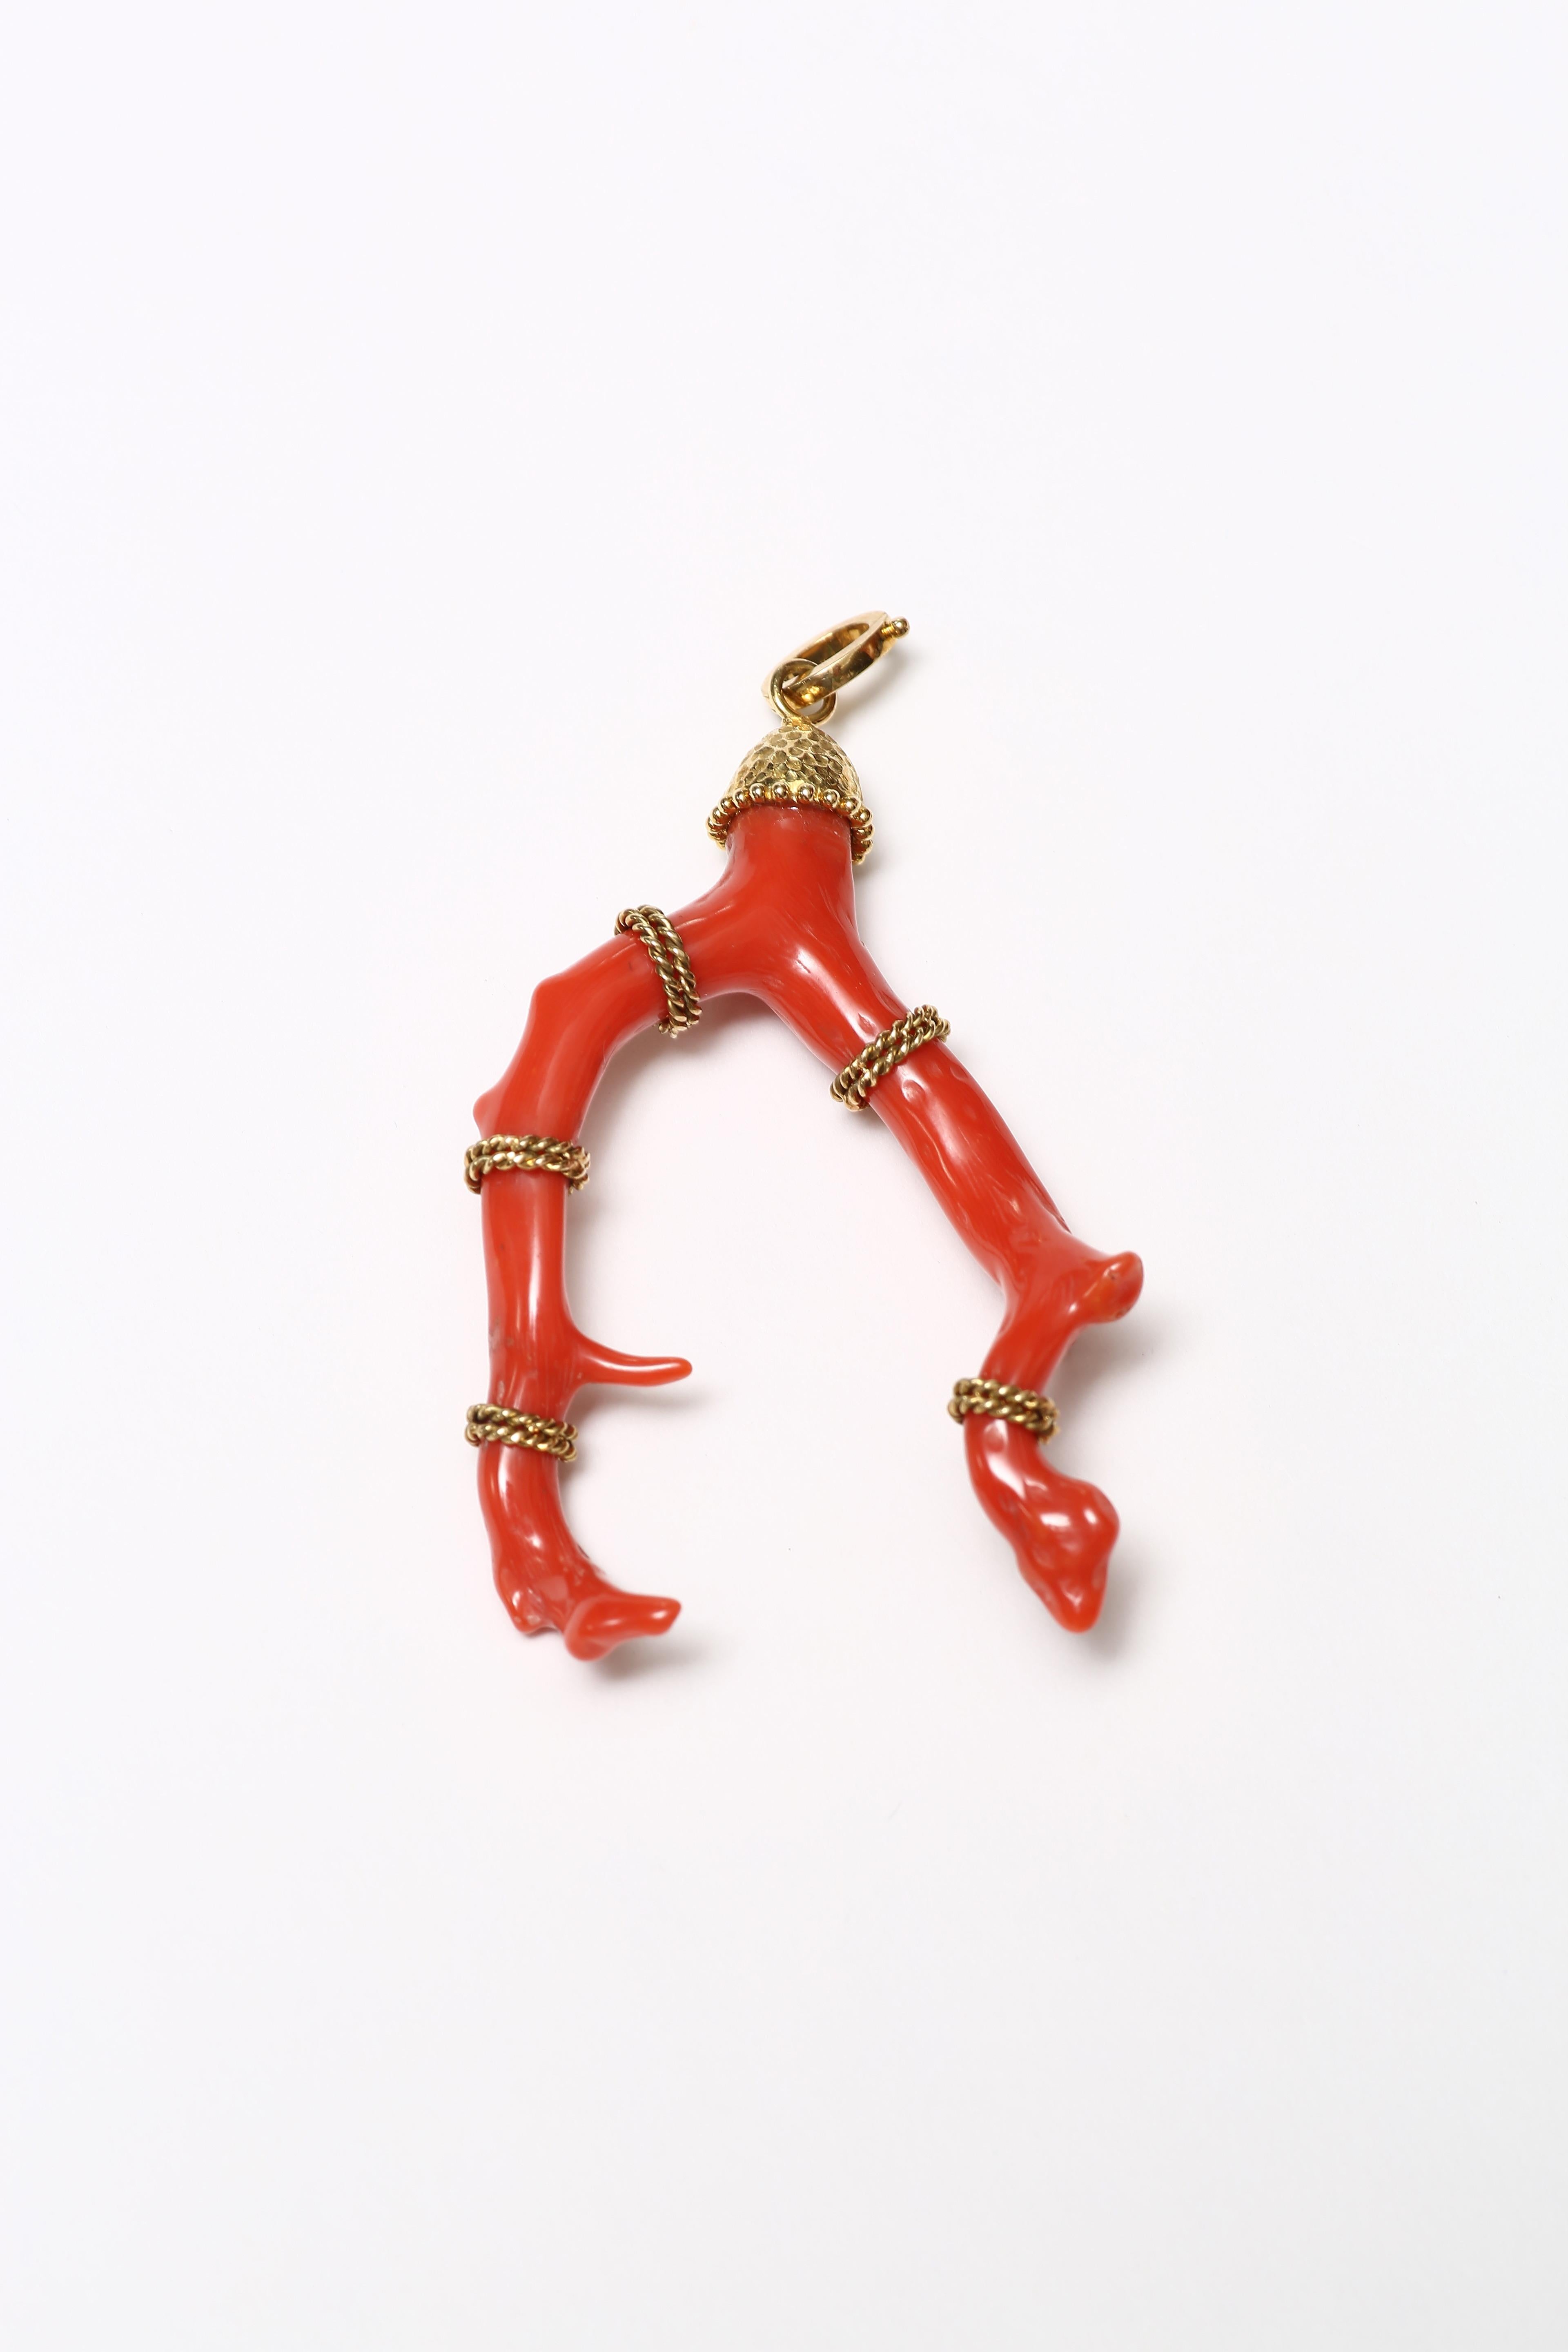 A handcrafted Sardinian branch coral pendant wrapped with twisted 18 karat gold rope. It comes with a top opening clasp to enable it to be hung on necklaces.

A beautiful example of a classic coral branch pendant, the arms wrapped in 18K twisted